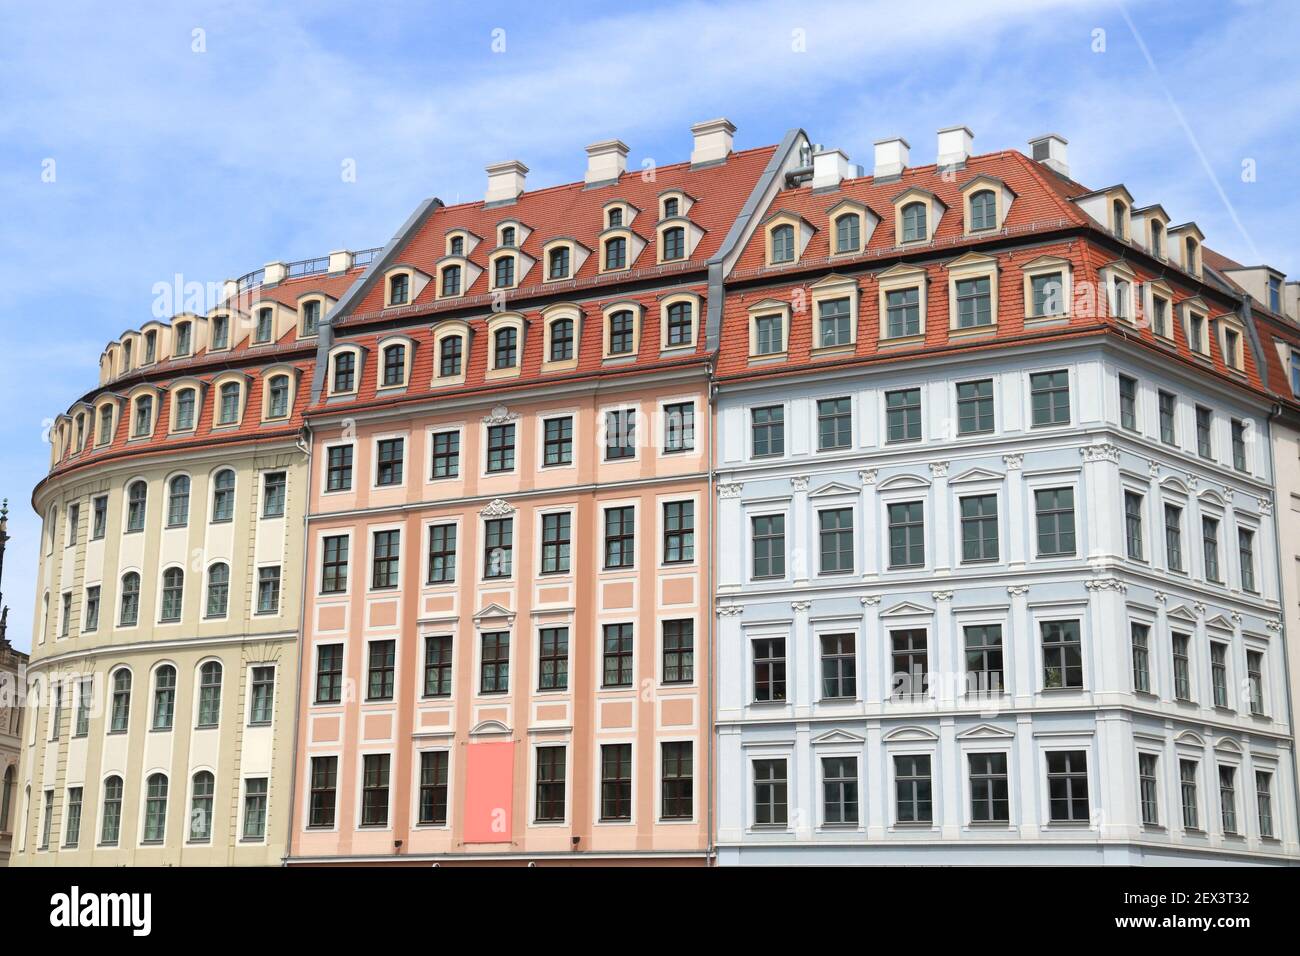 Dresden city in Germany (State of Sachsen). Old Town (Altstadt) colorful architecture at Neumarkt square. Stock Photo